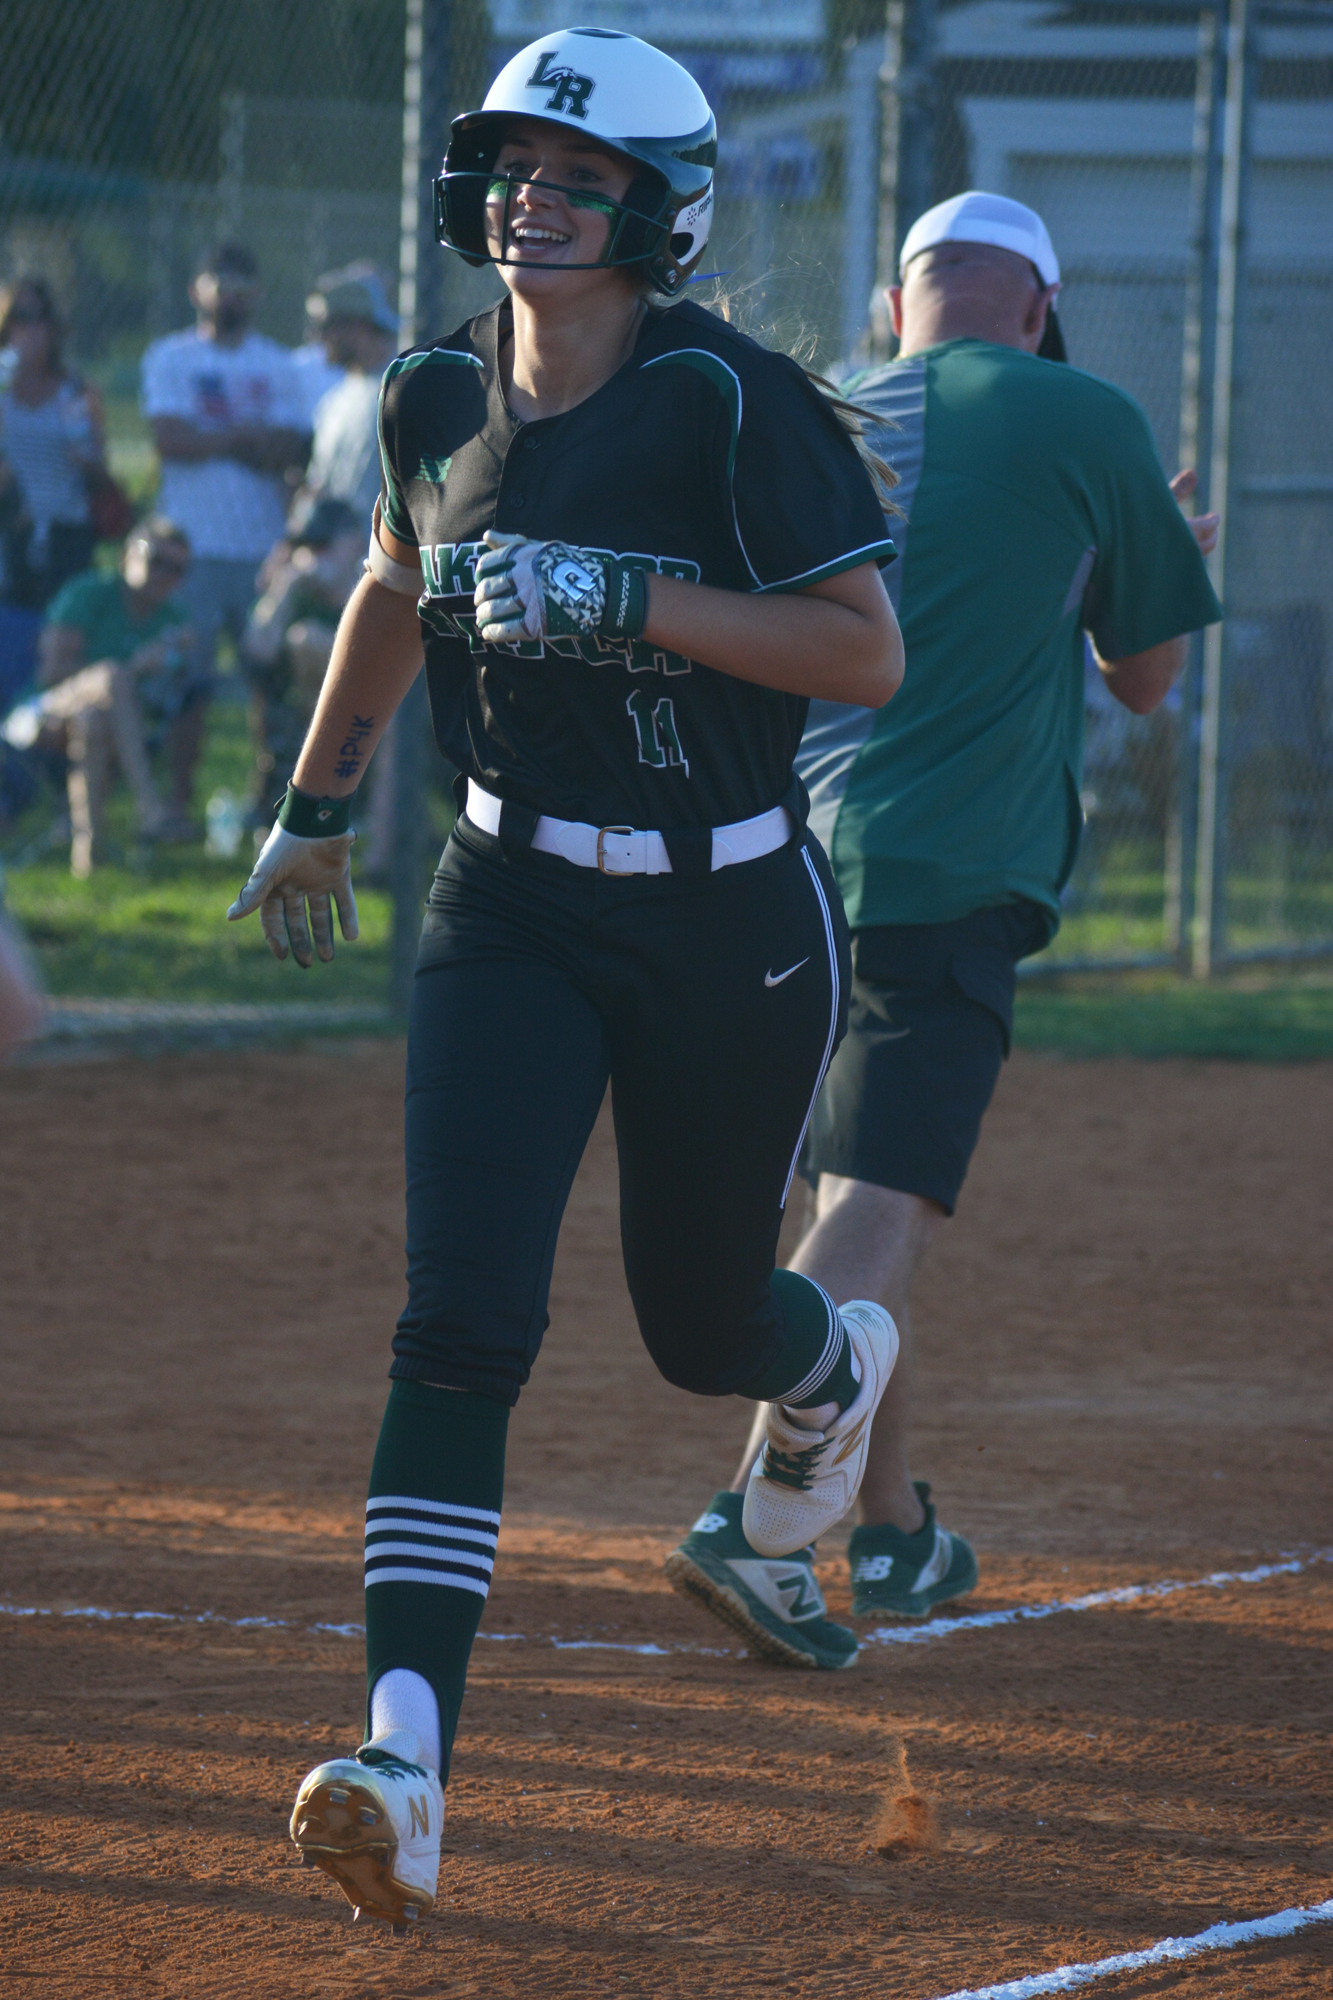 Junior Lakewood Ranch pitcher/outfielder Claire Davidson jogs home after a home run. She is hitting .451 with 13 home runs.